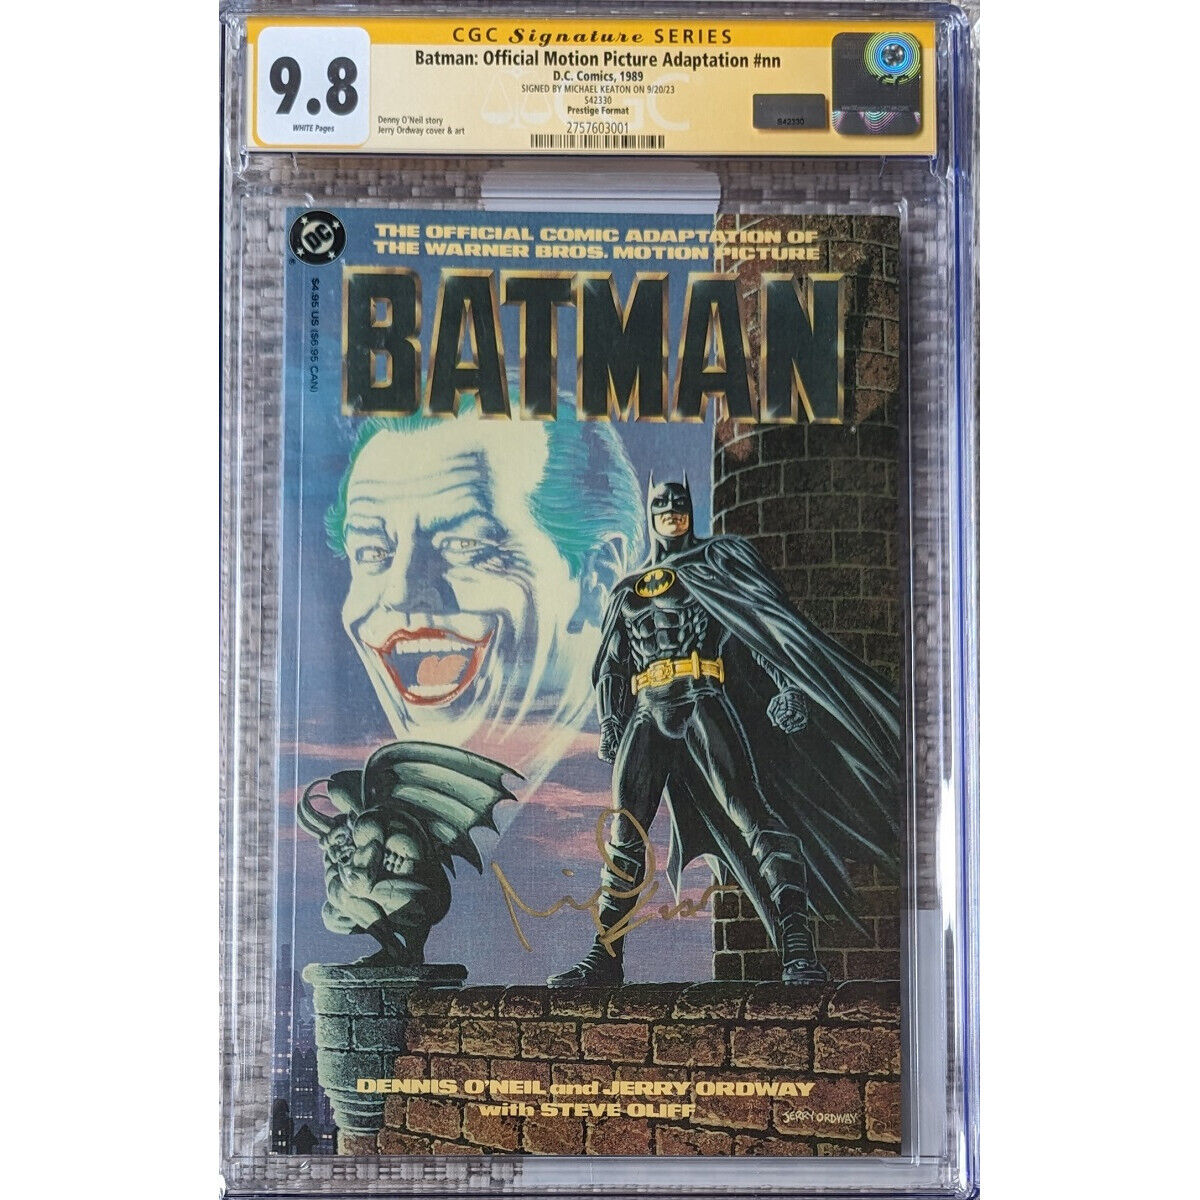 Batman Official Movie Adaptation__CGC 9.8 SS__Signed by Michael Keaton